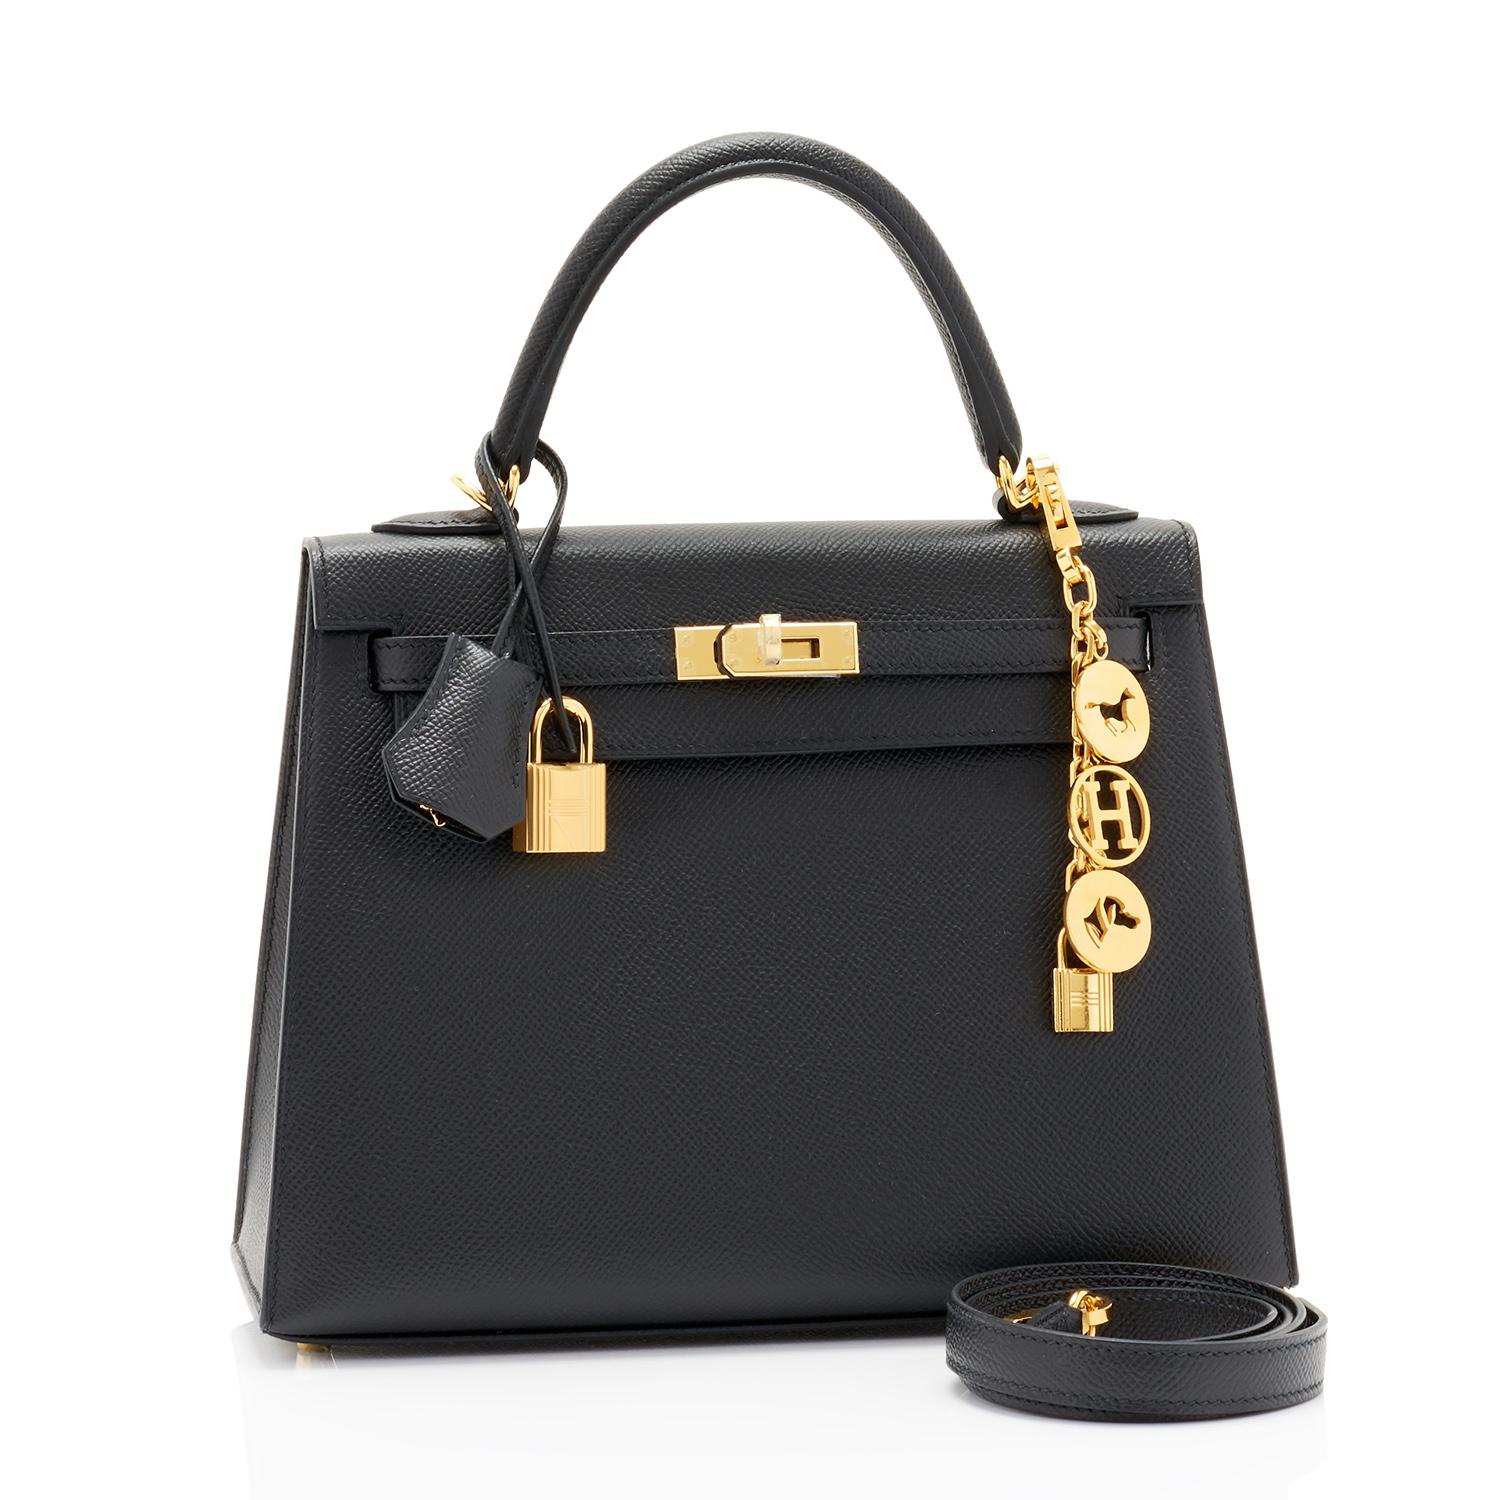 Hermes Kelly 25cm Black Epsom Sellier Gold Jewel Brand New Store Fresh U Stamp, 2022
Just purchased from Hermes store; bag bears new interior 2022 U Stamp.
Brand New in Box. Store Fresh. Pristine Condition (with plastic on hardware).
Perfect gift!